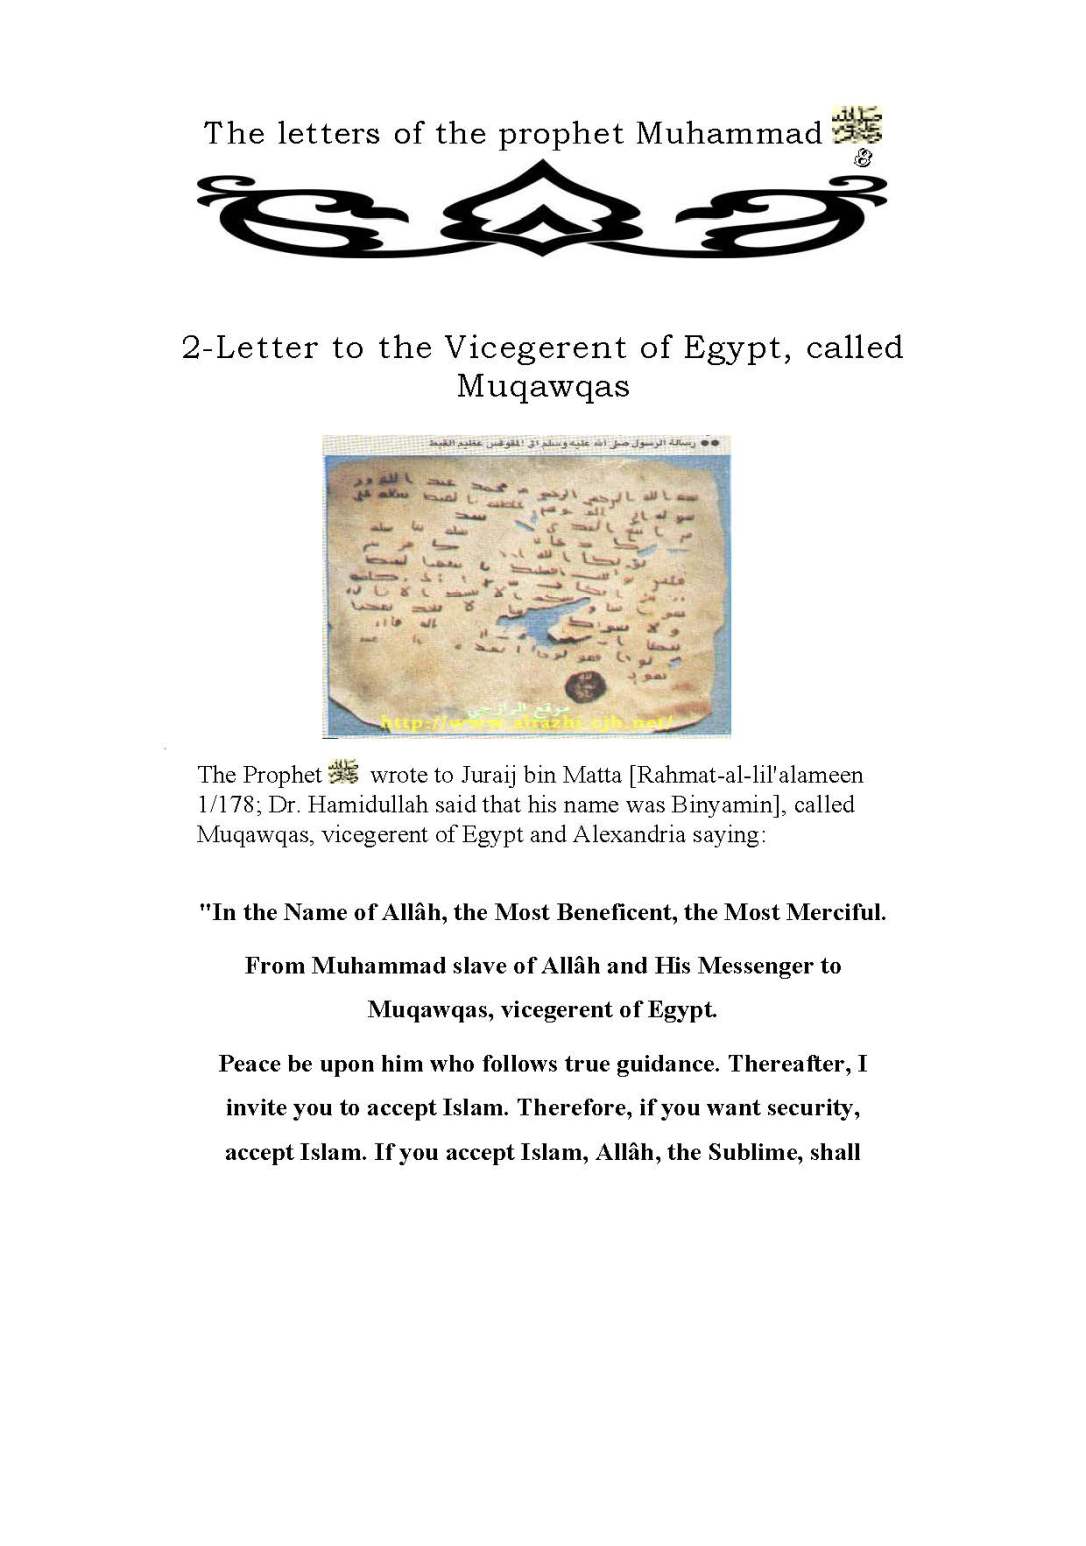 The-Letters-of-Prophet-Muhammad-saw_Page_09